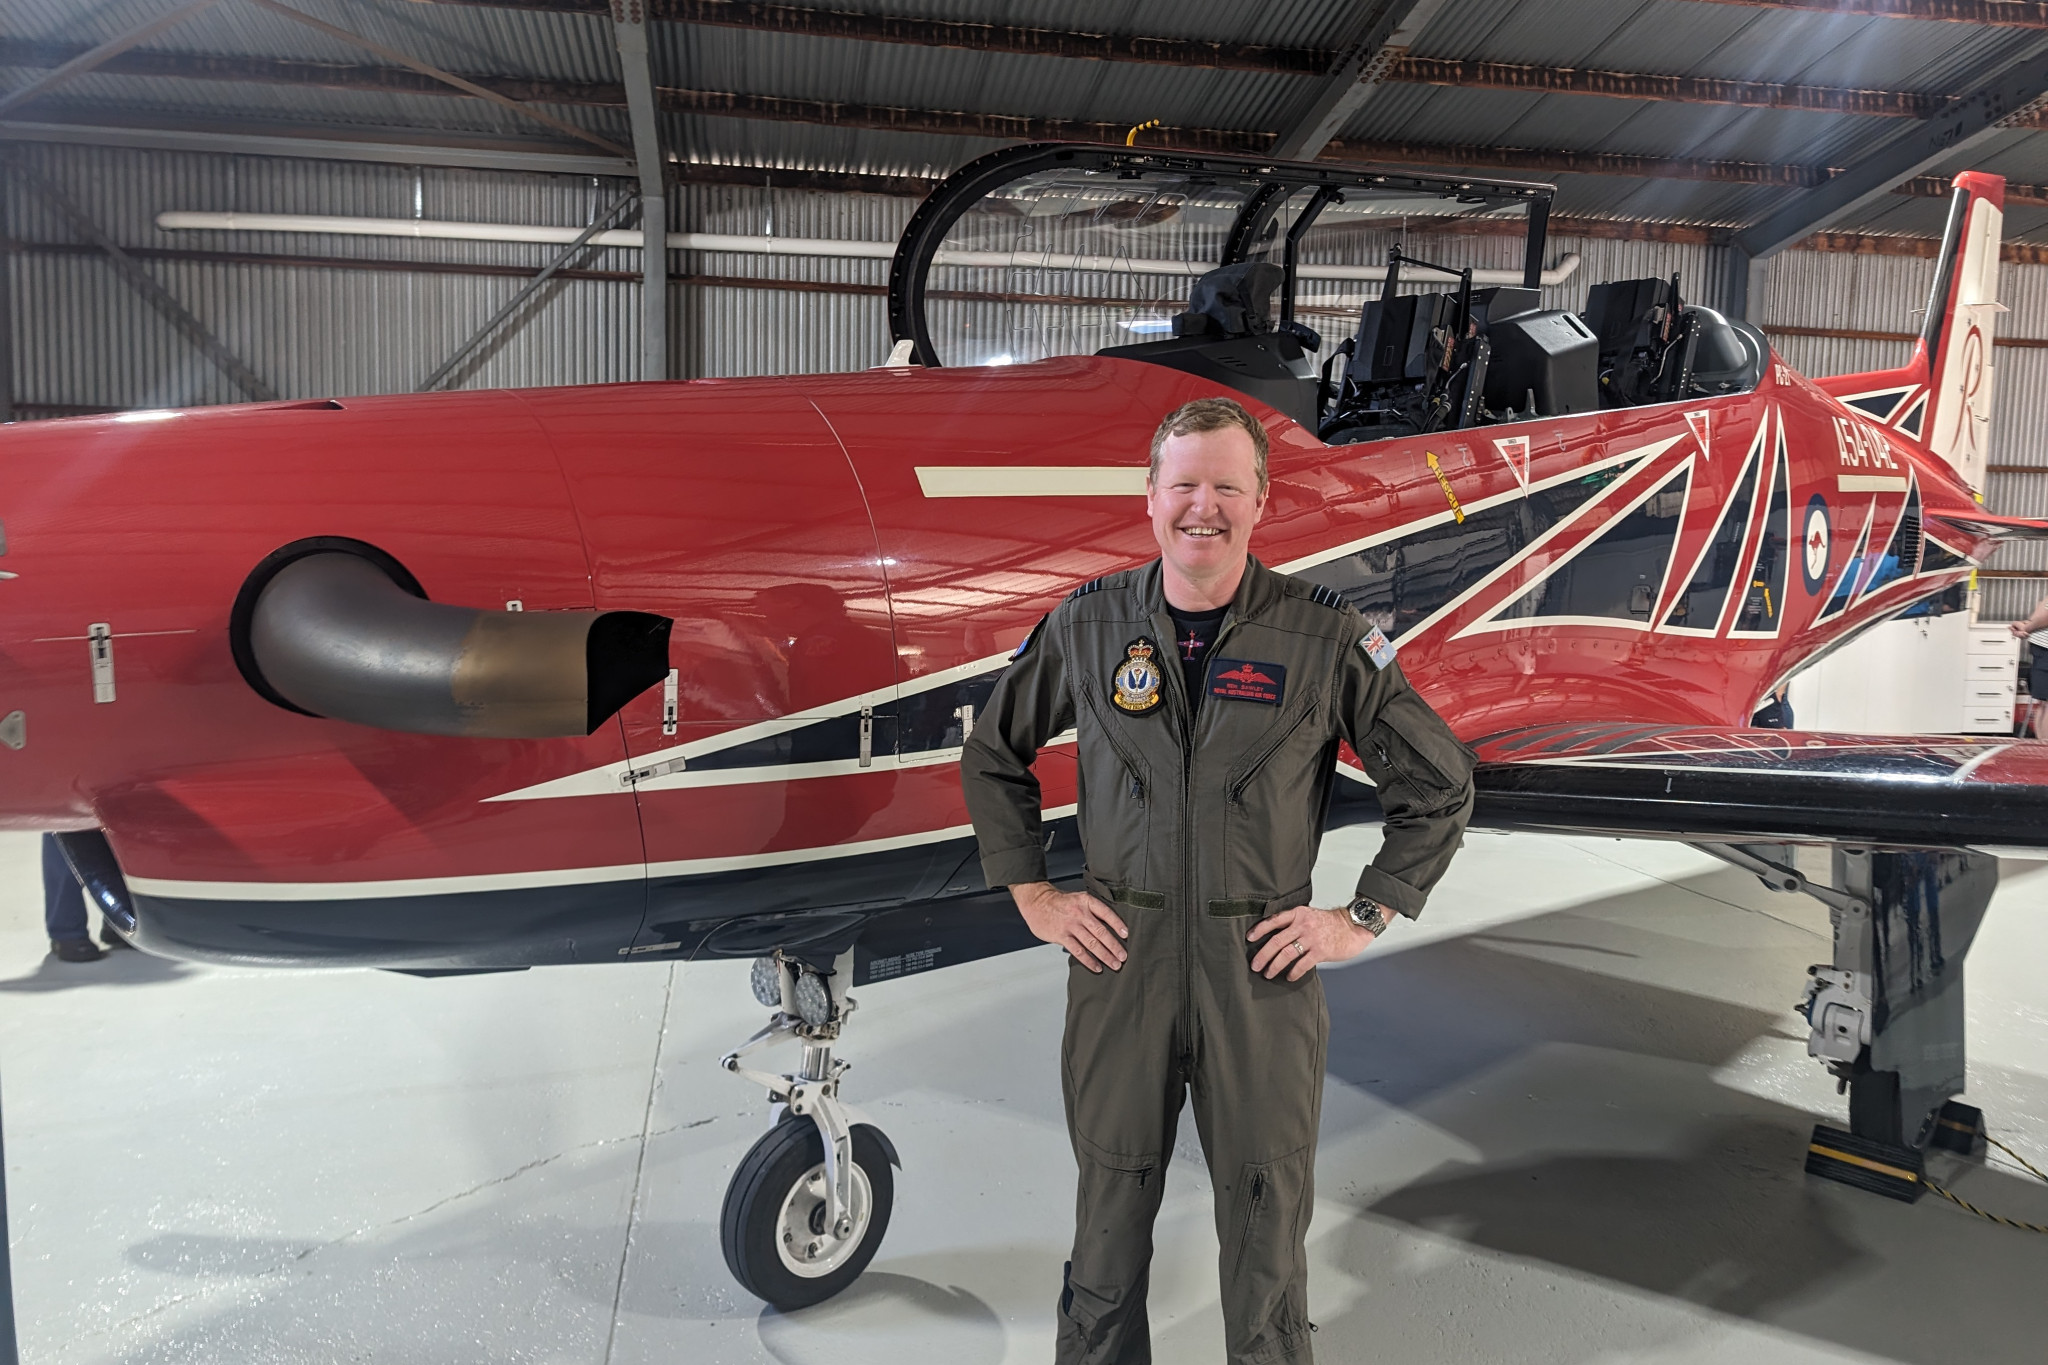 Gilgandra-bred Ben Sawley was in Dubbo recently to train RAAF trainee pilots. Photo contributed.